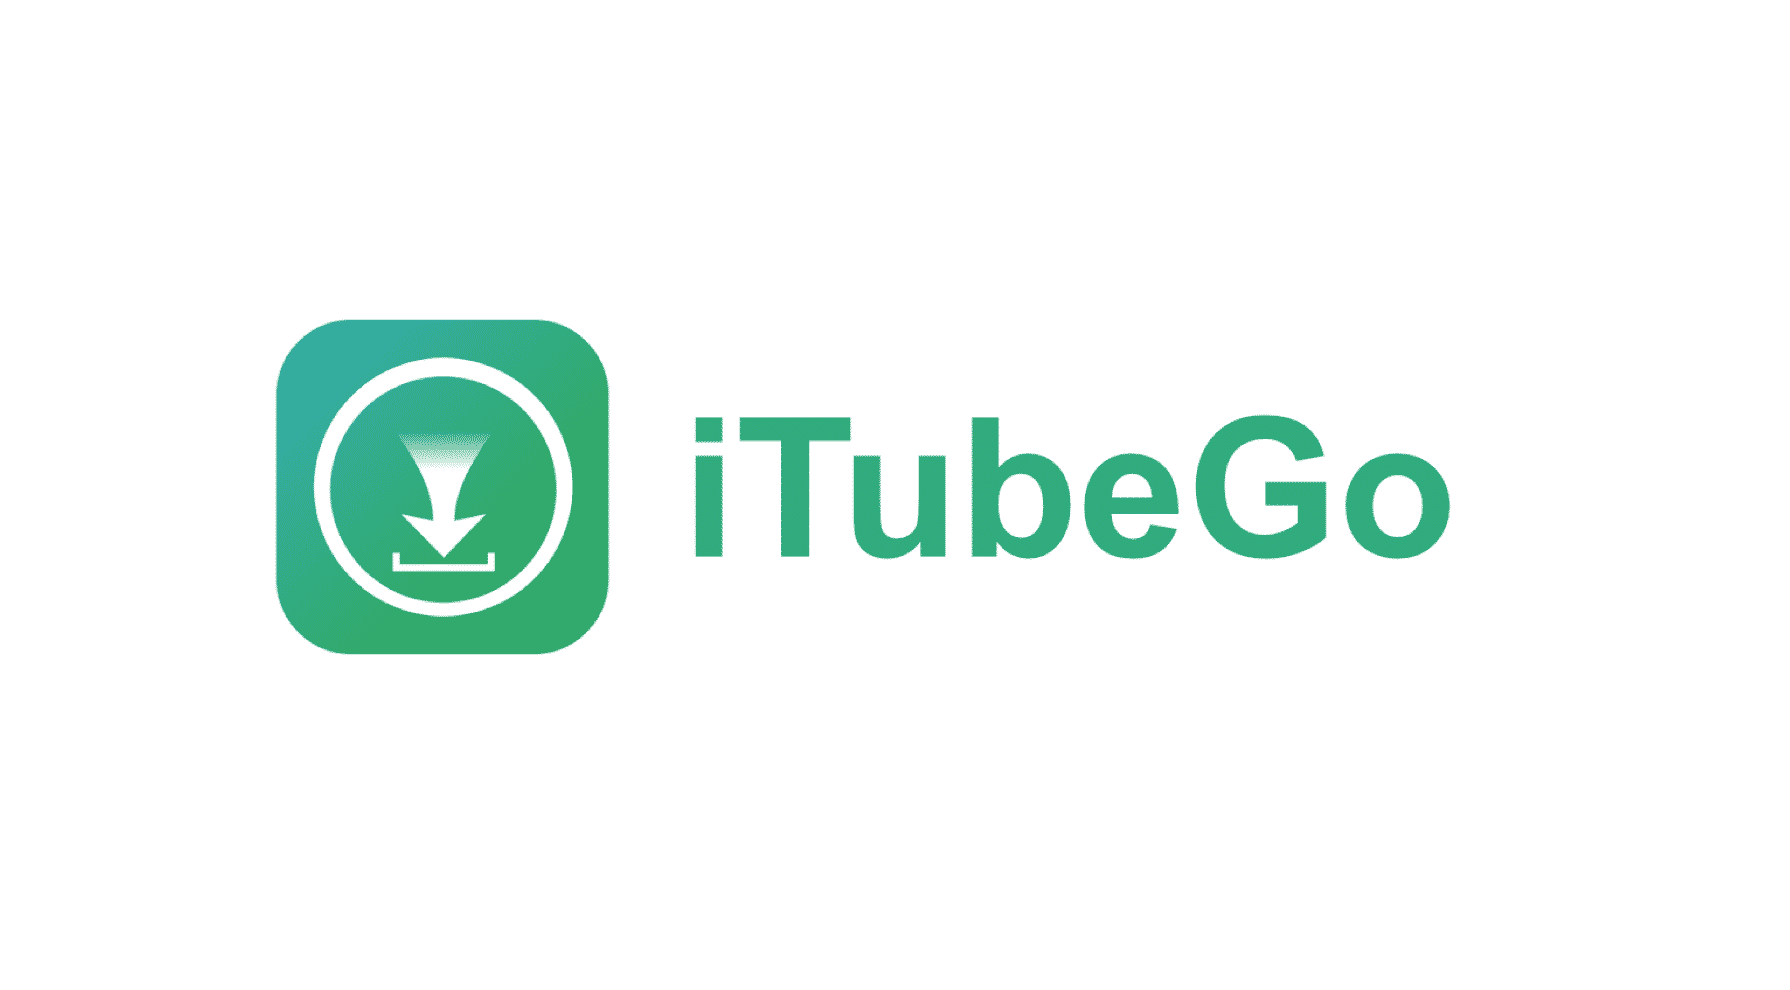 iTubeGo-Review-Full-HD-YouTube-Downloader-You-Need-to-Know